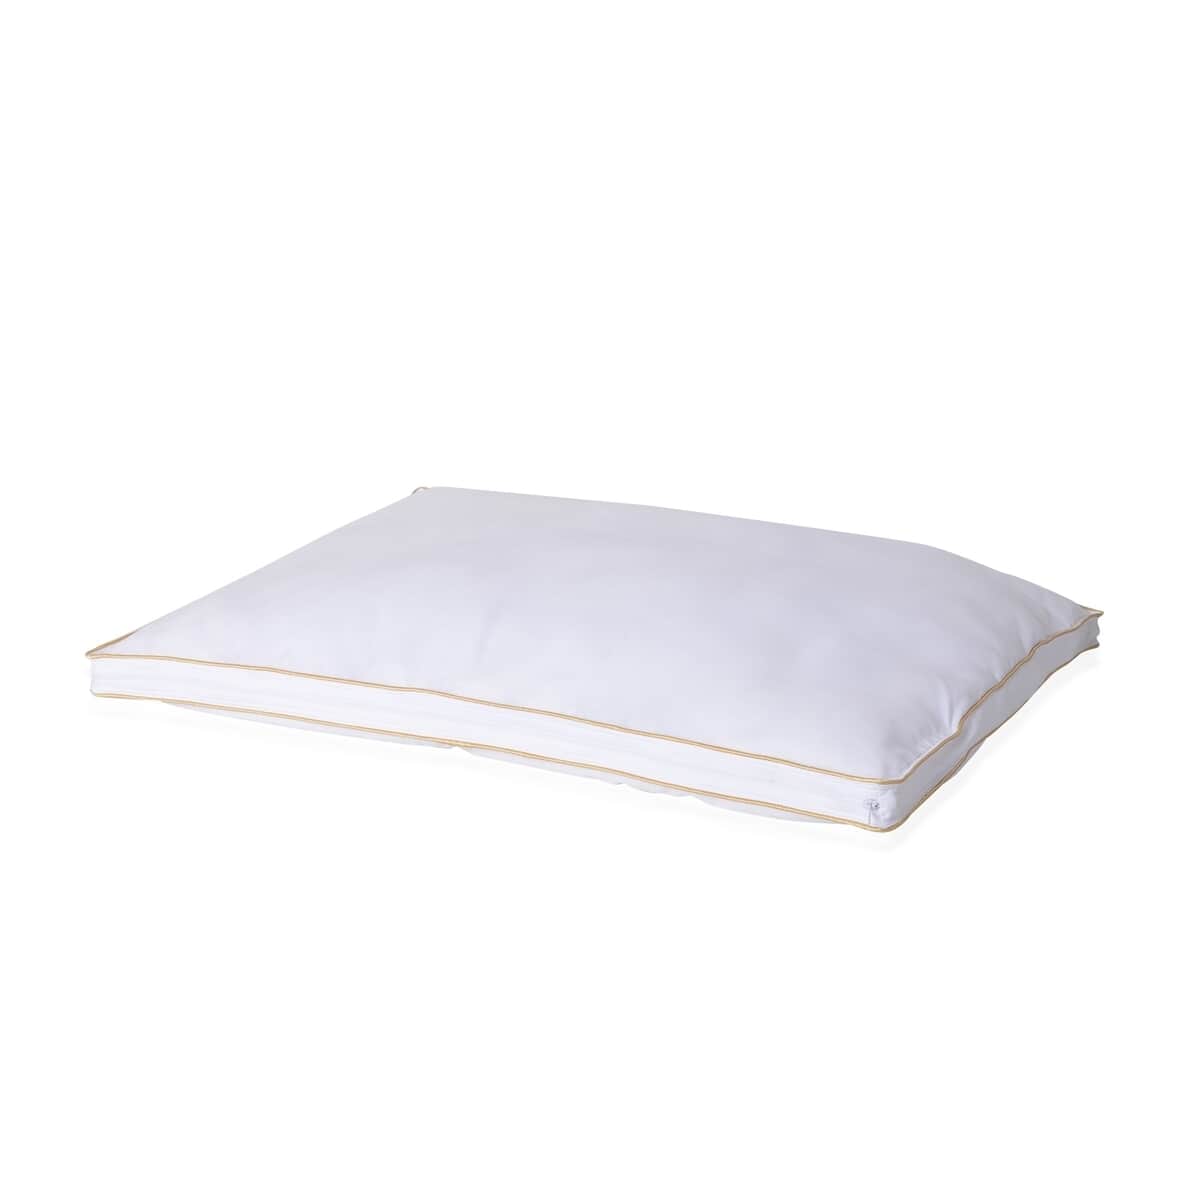 Homesmart Set of 2 White Down Alternative Pillow Protectors with Golden Piping (Full, Microfiber) image number 3